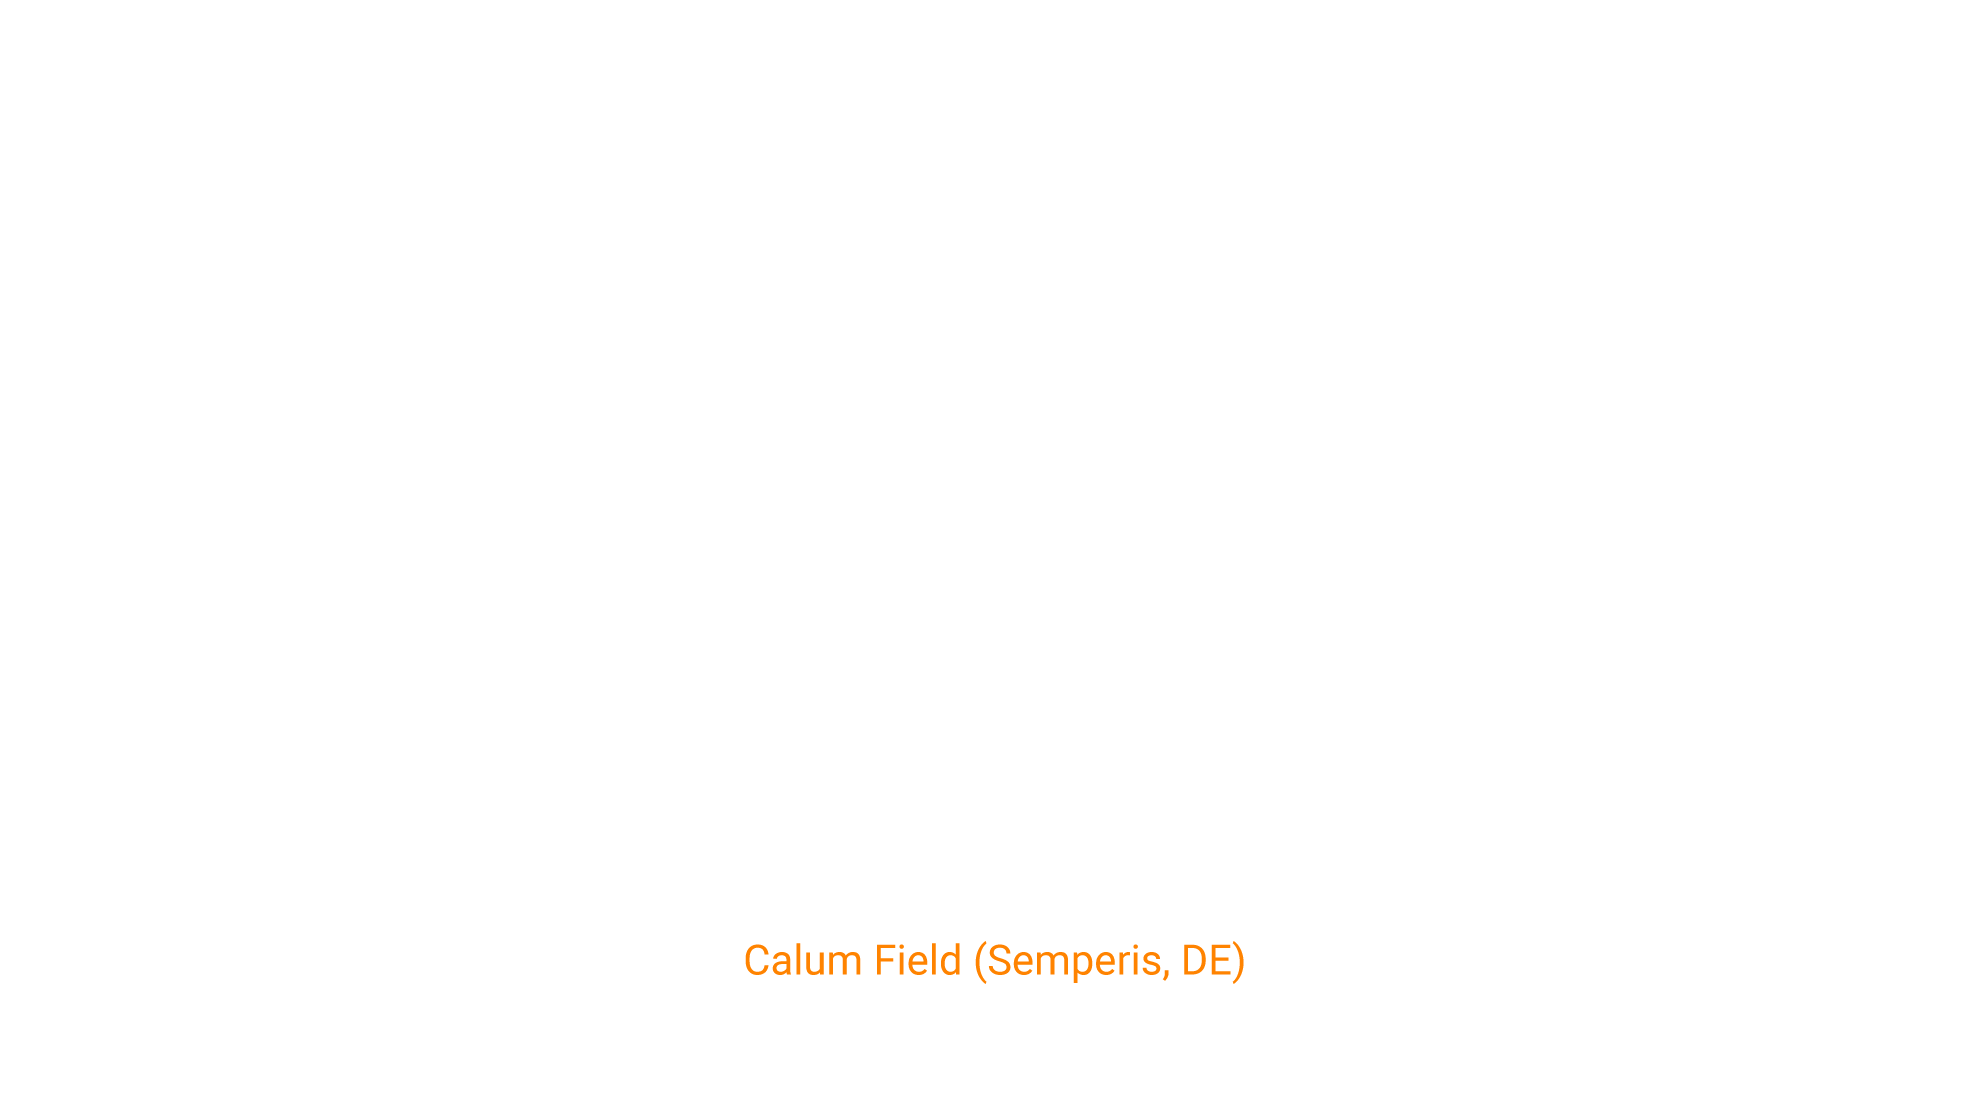 Ransomware, Risk, &amp; Recovery: Protecting and Creating Resilience for Hybrid Active Directory